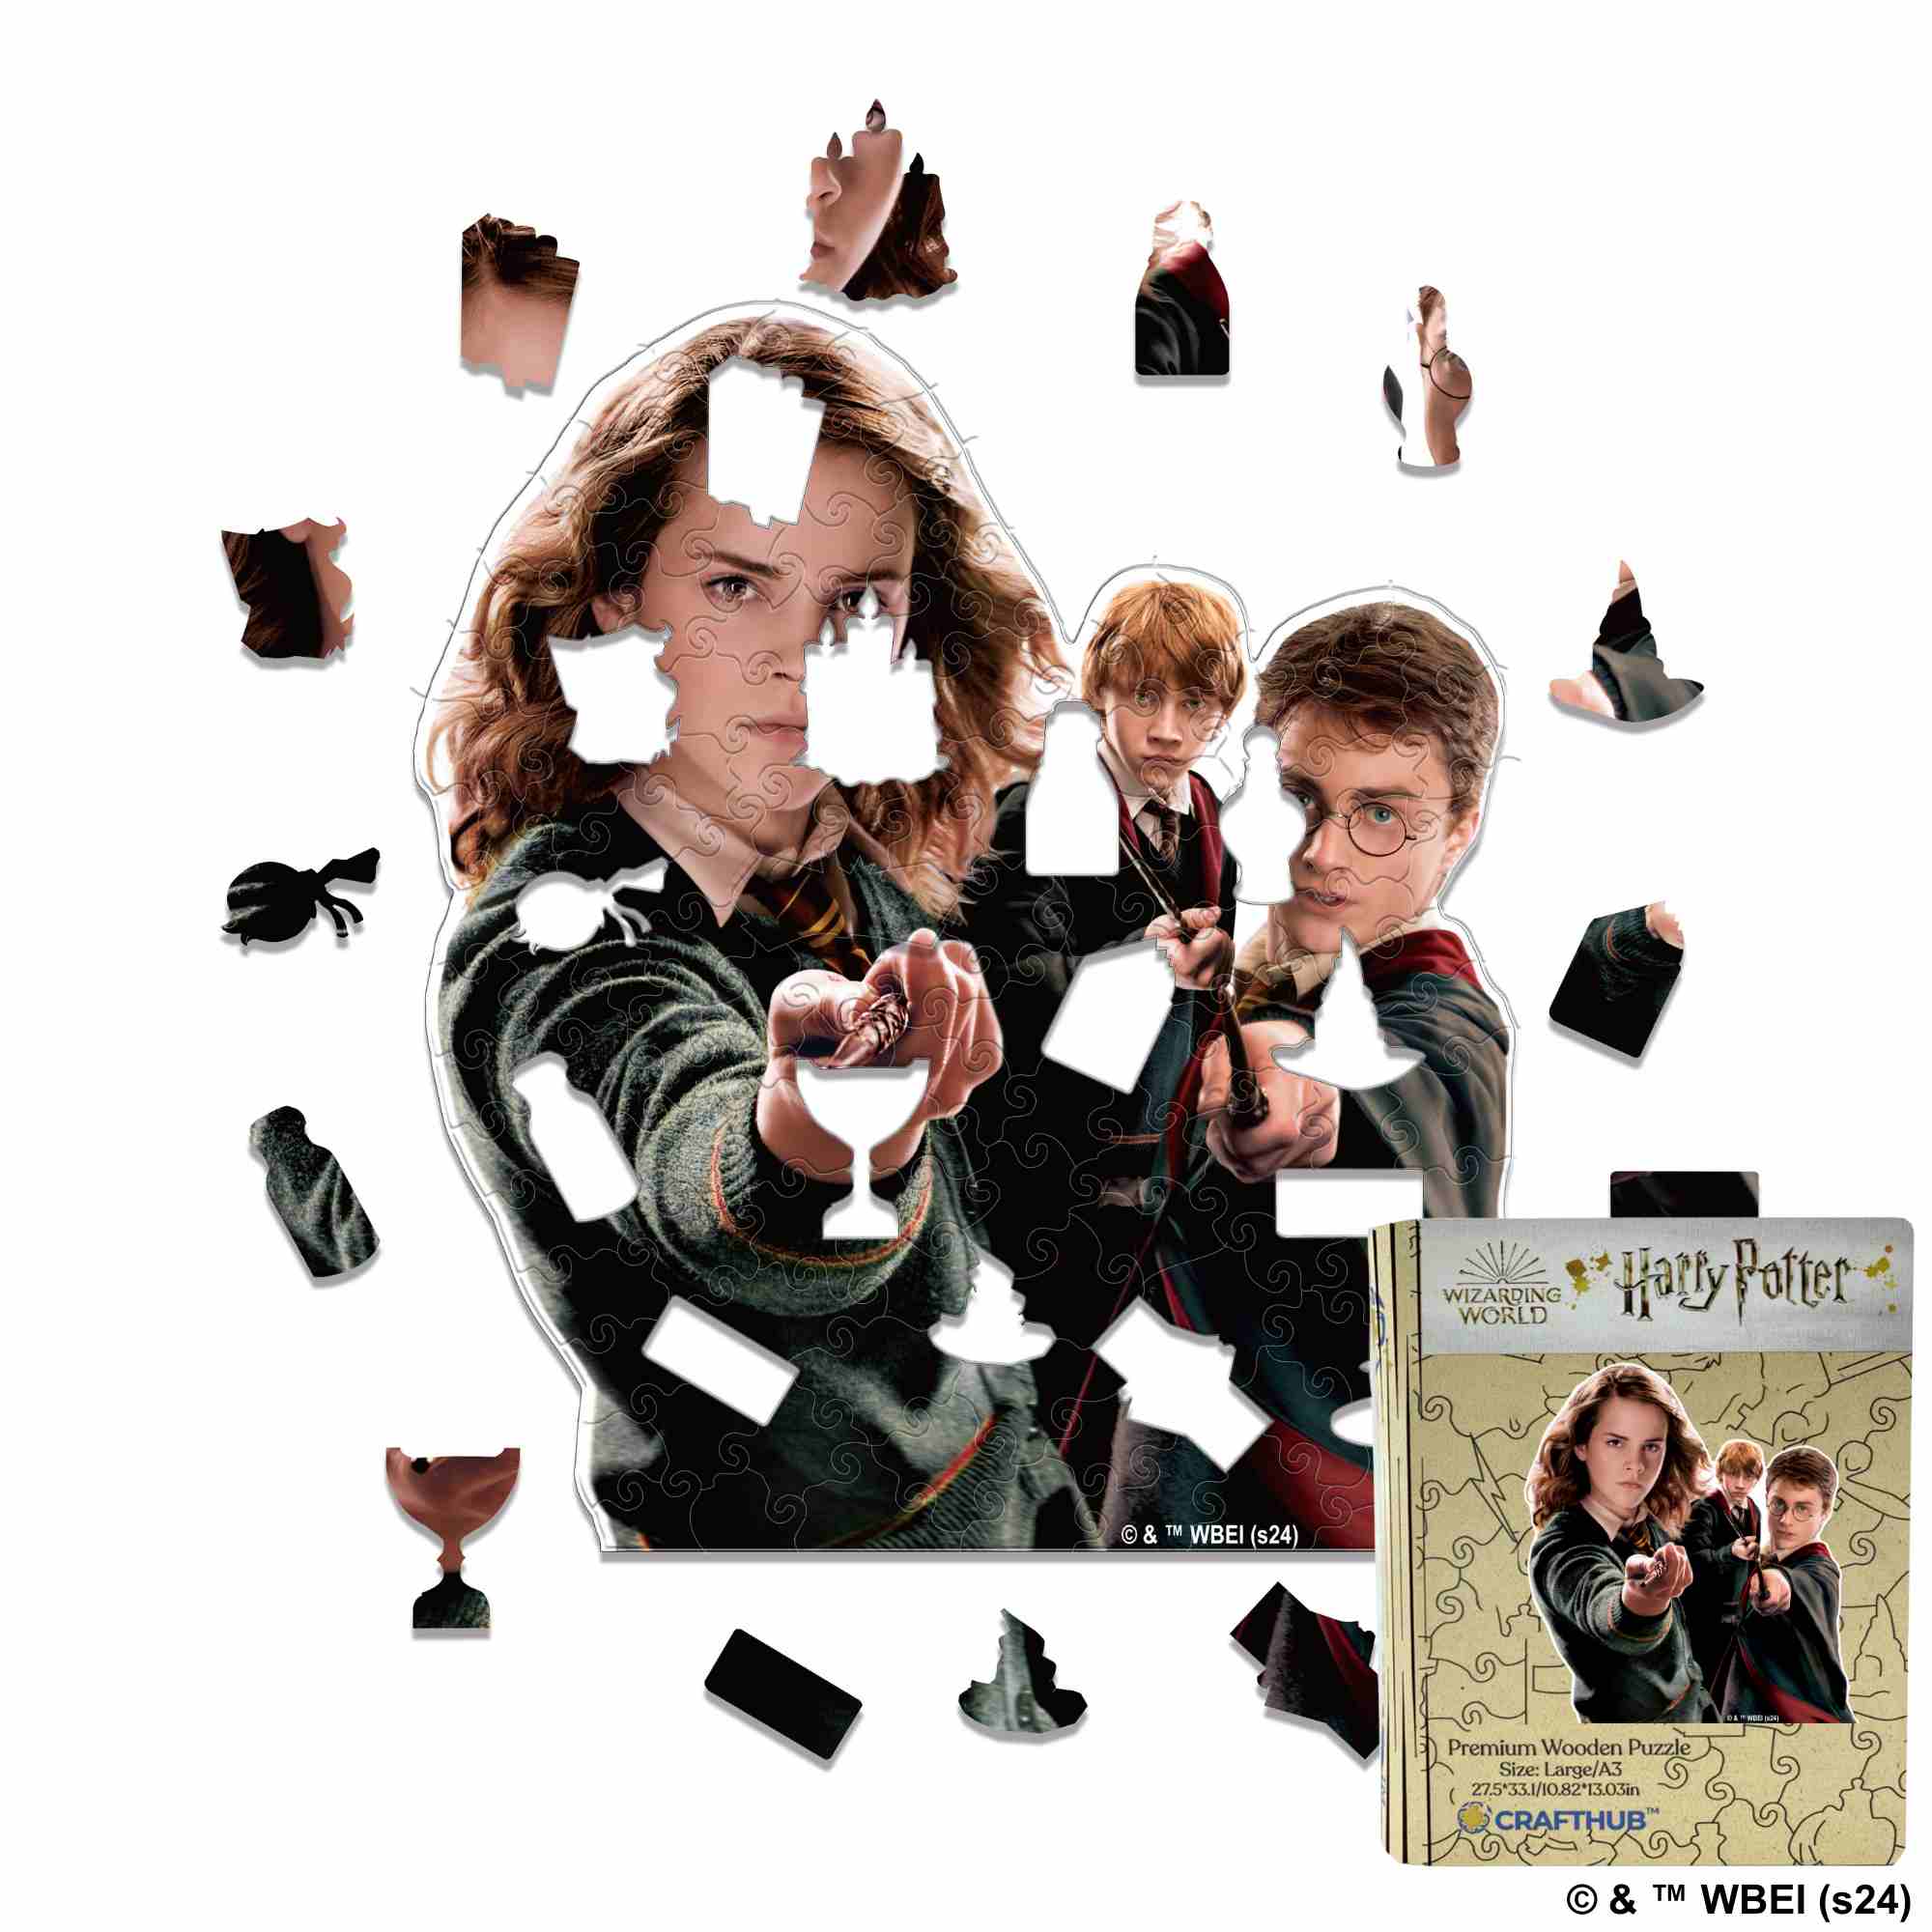 Animal Jigsaw Puzzle > Wooden Jigsaw Puzzle > Jigsaw Puzzle A3 The Hogwarts Heroes Wooden Jigsaw Puzzle